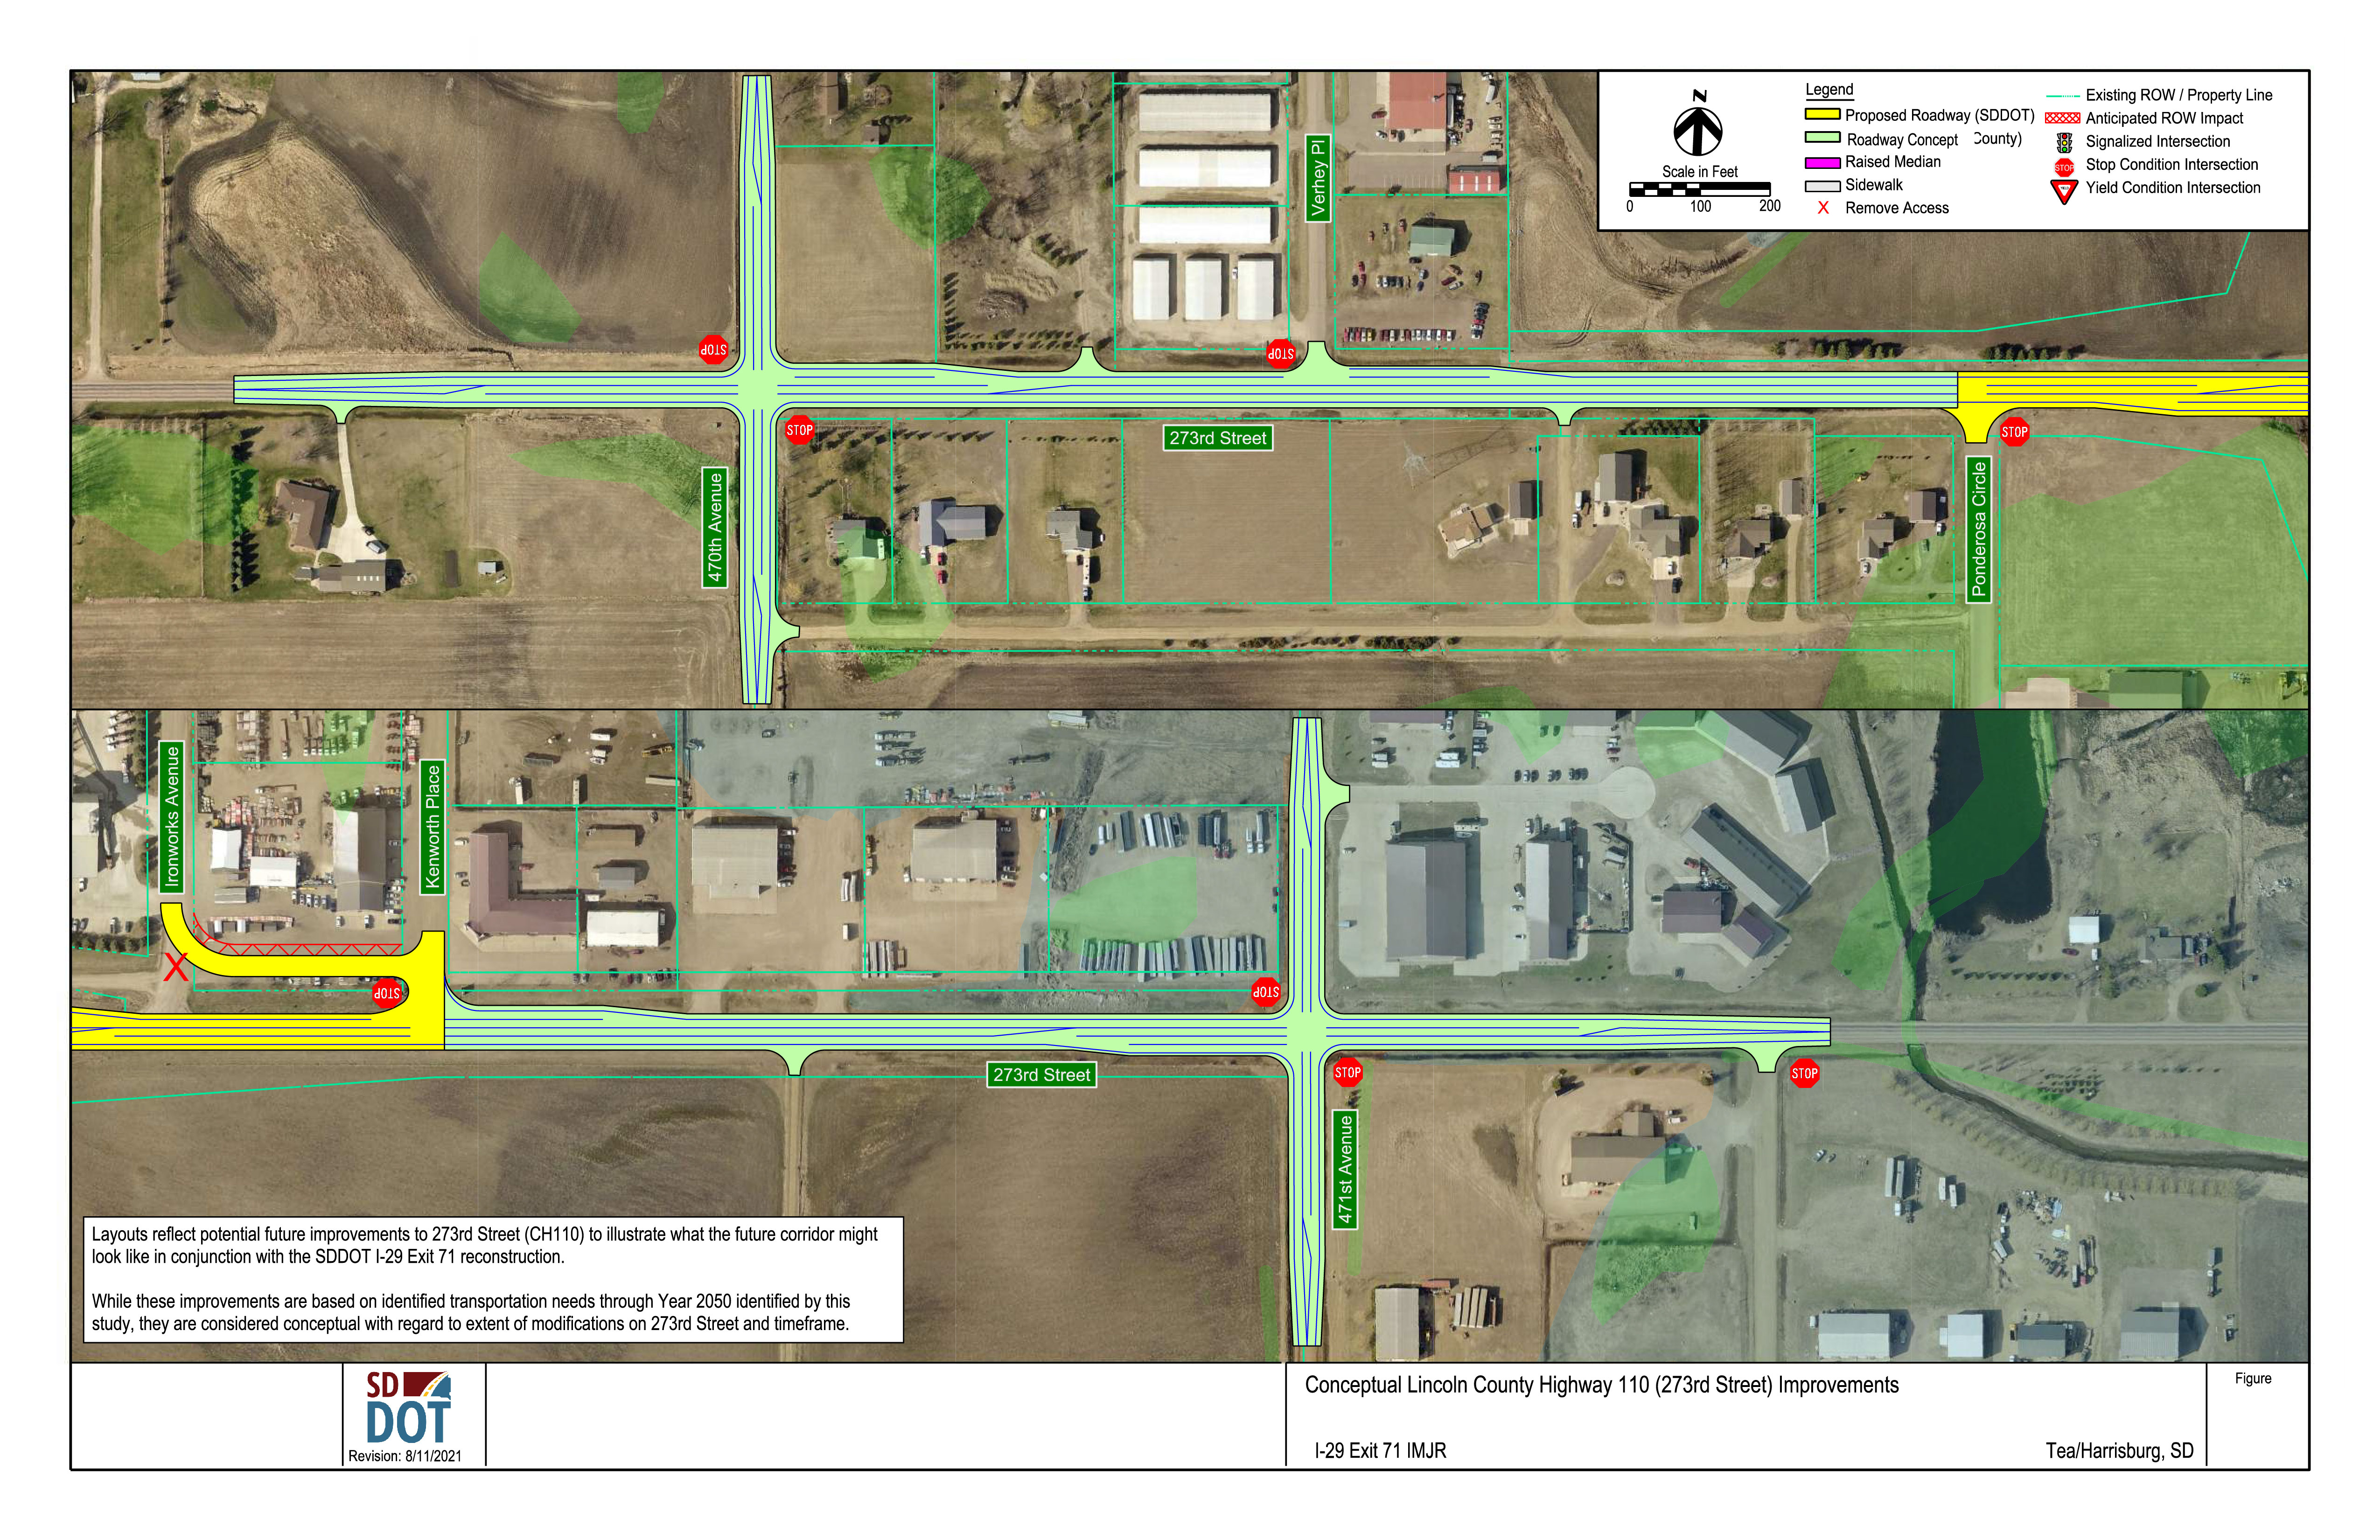 This image shows a conceptual layout for County Highway 10/273rd Street. Details on the diagram include proposed roadway, roadway concept, raised median, sidewalk, removed access, existing right of way/property lines, anticipated right of way impacts, signalized intersections, stop condition intersections and yield condition intersections. 